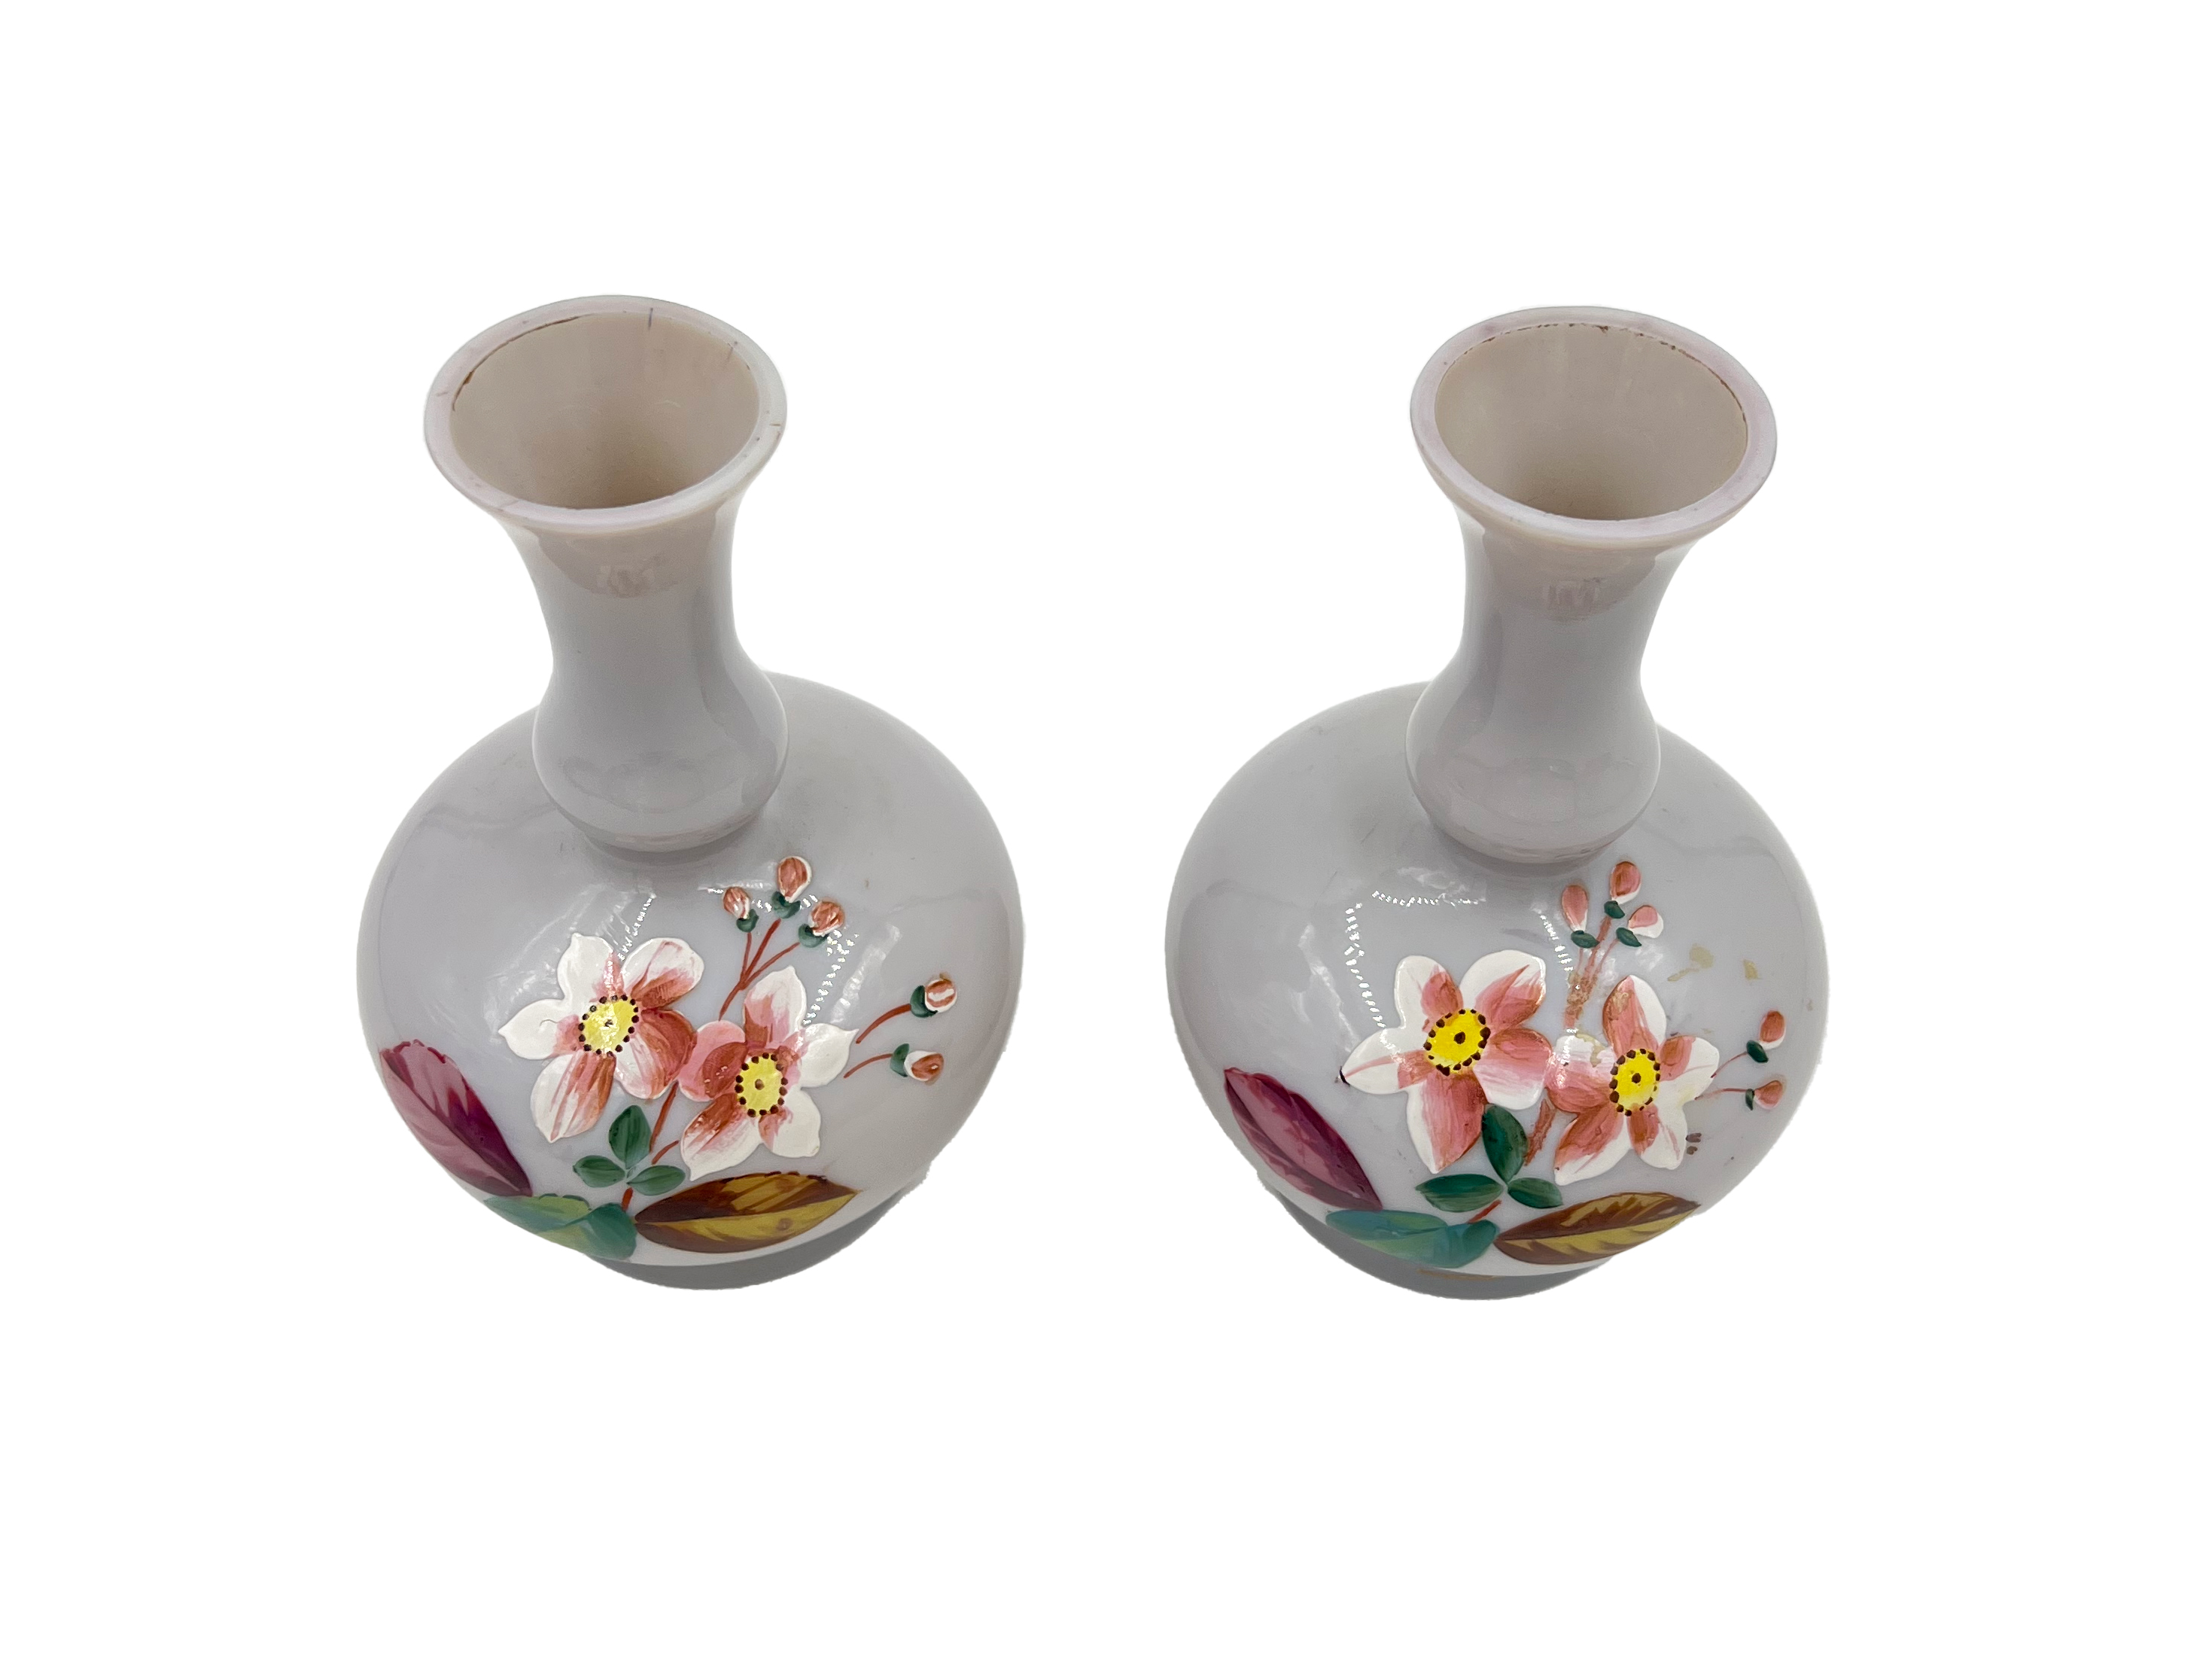 PAIR OF OPALINE GLASS VASES - Image 2 of 2